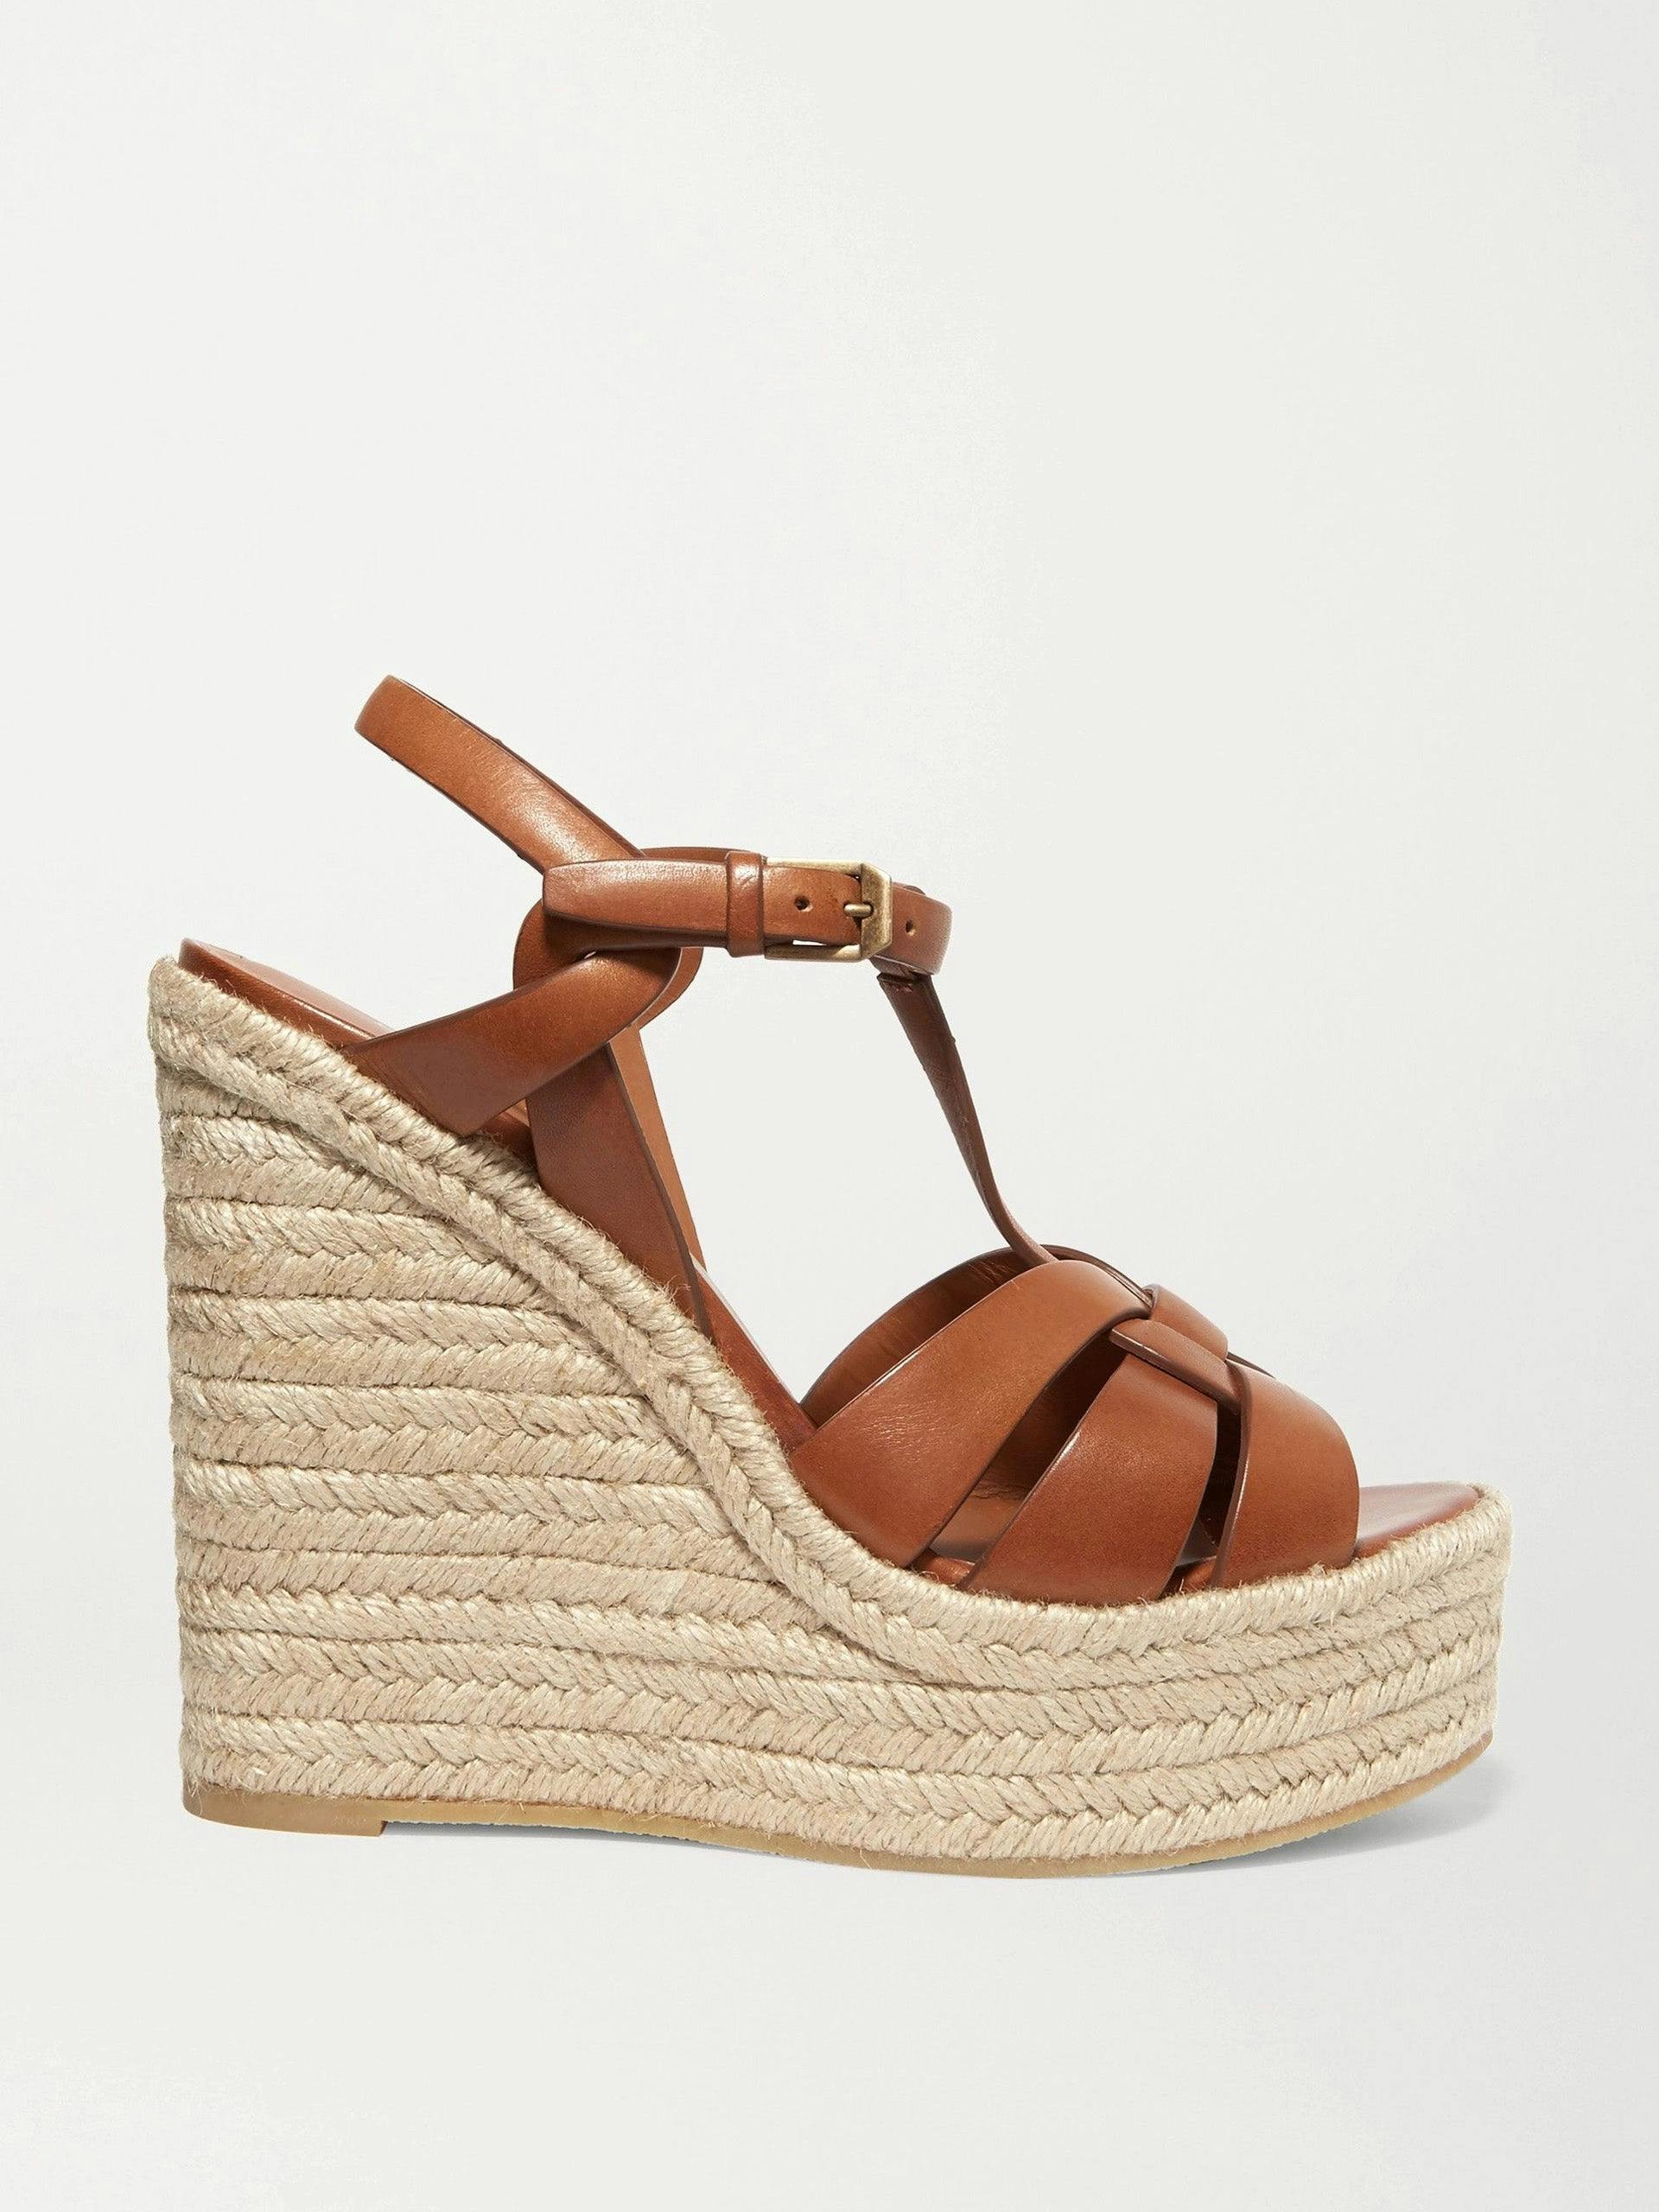 Tan woven leather espadrille wedge sandals